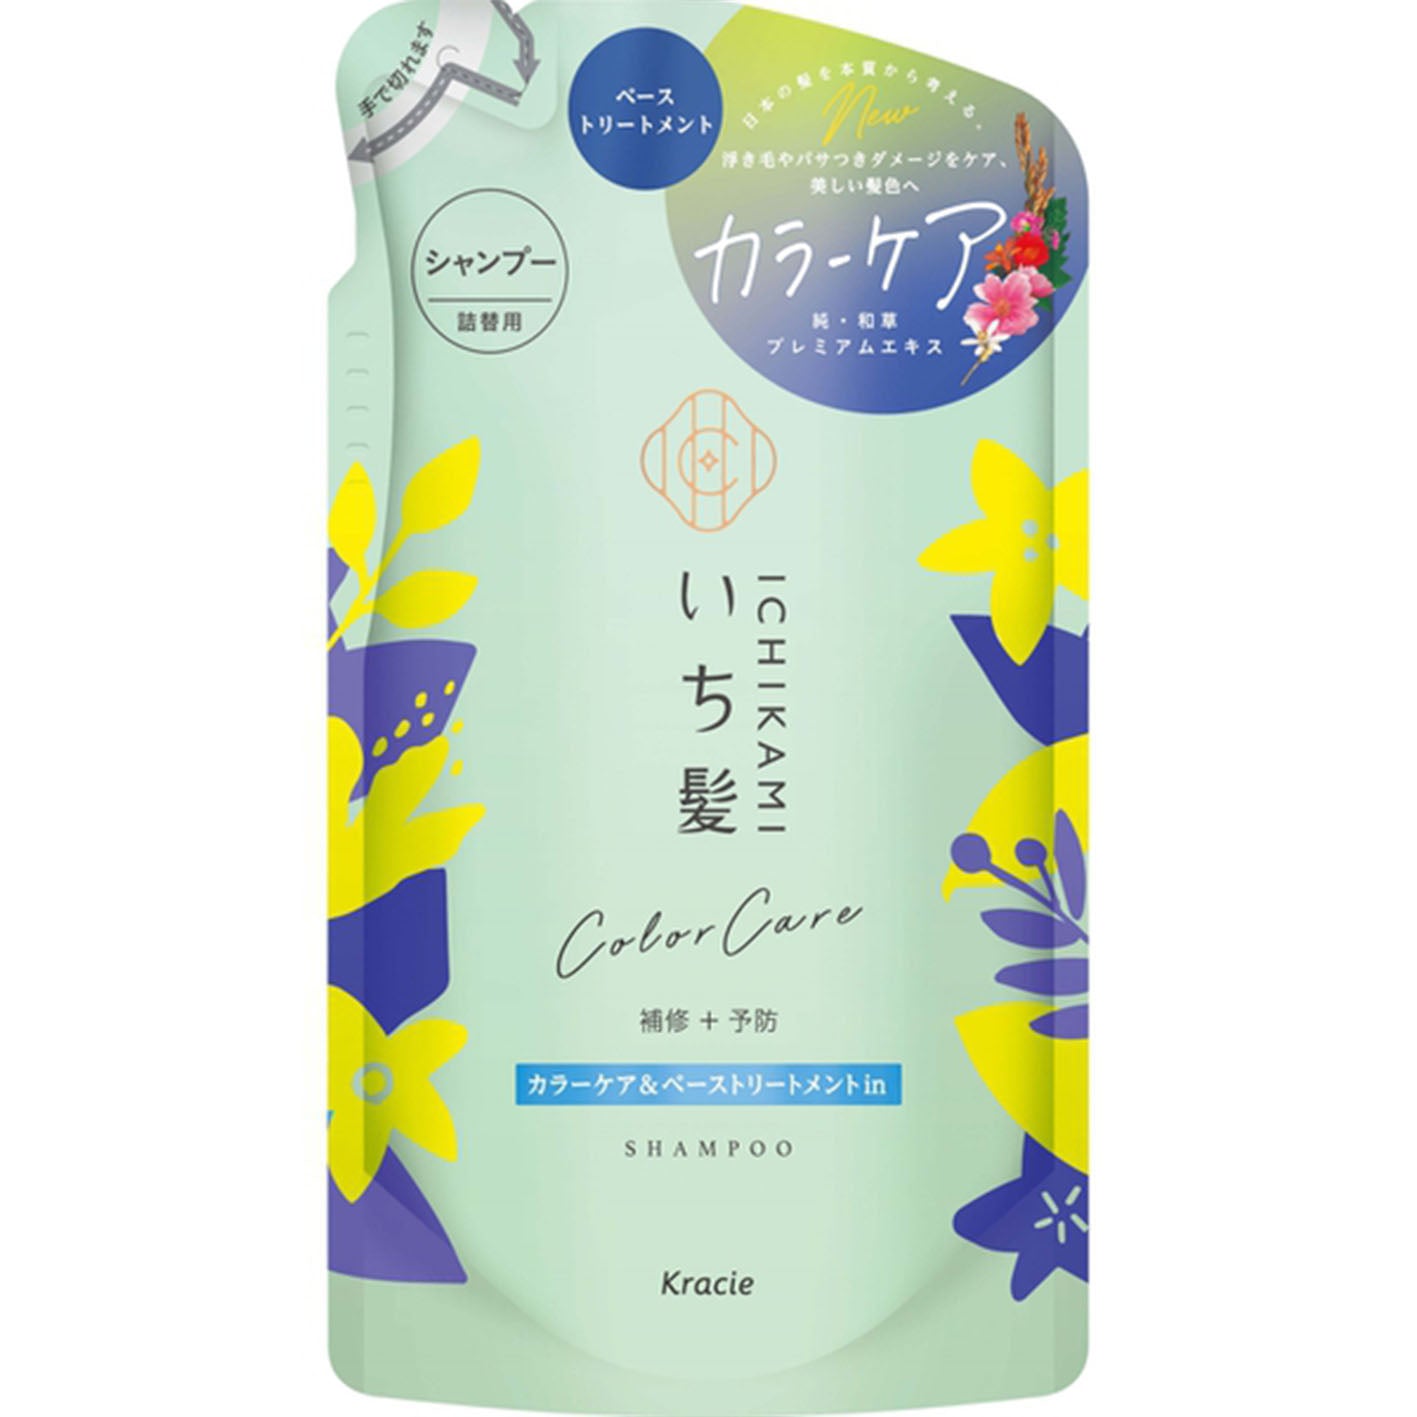 Ichikami Color Care Hair Shampoo 330ml - Refill - Harajuku Culture Japan - Japanease Products Store Beauty and Stationery